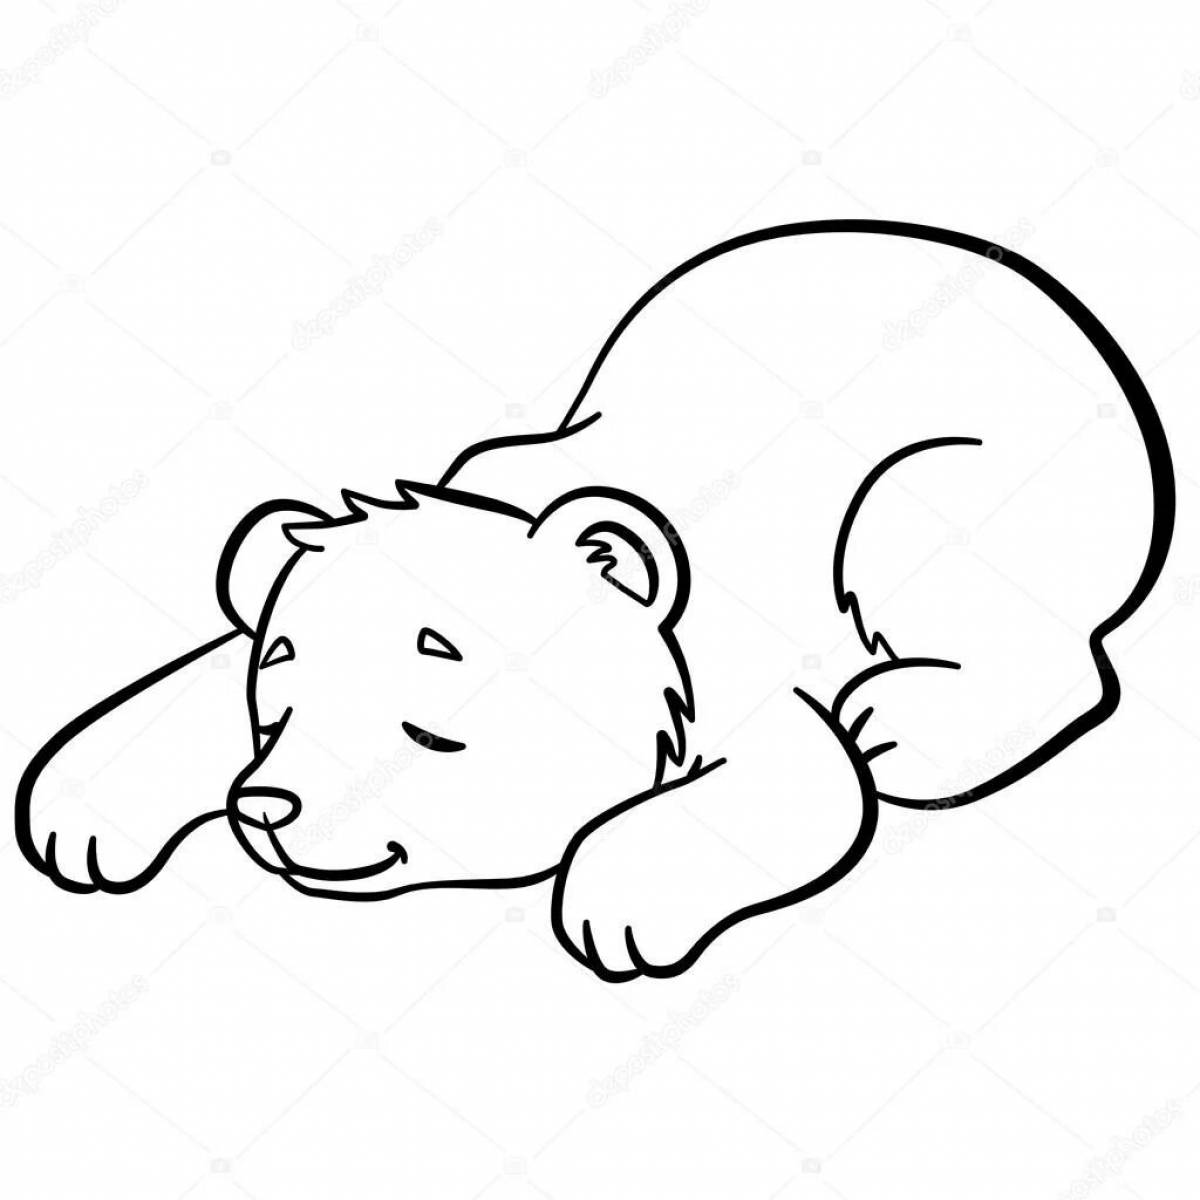 Radiant coloring page: why do bears sleep in winter?